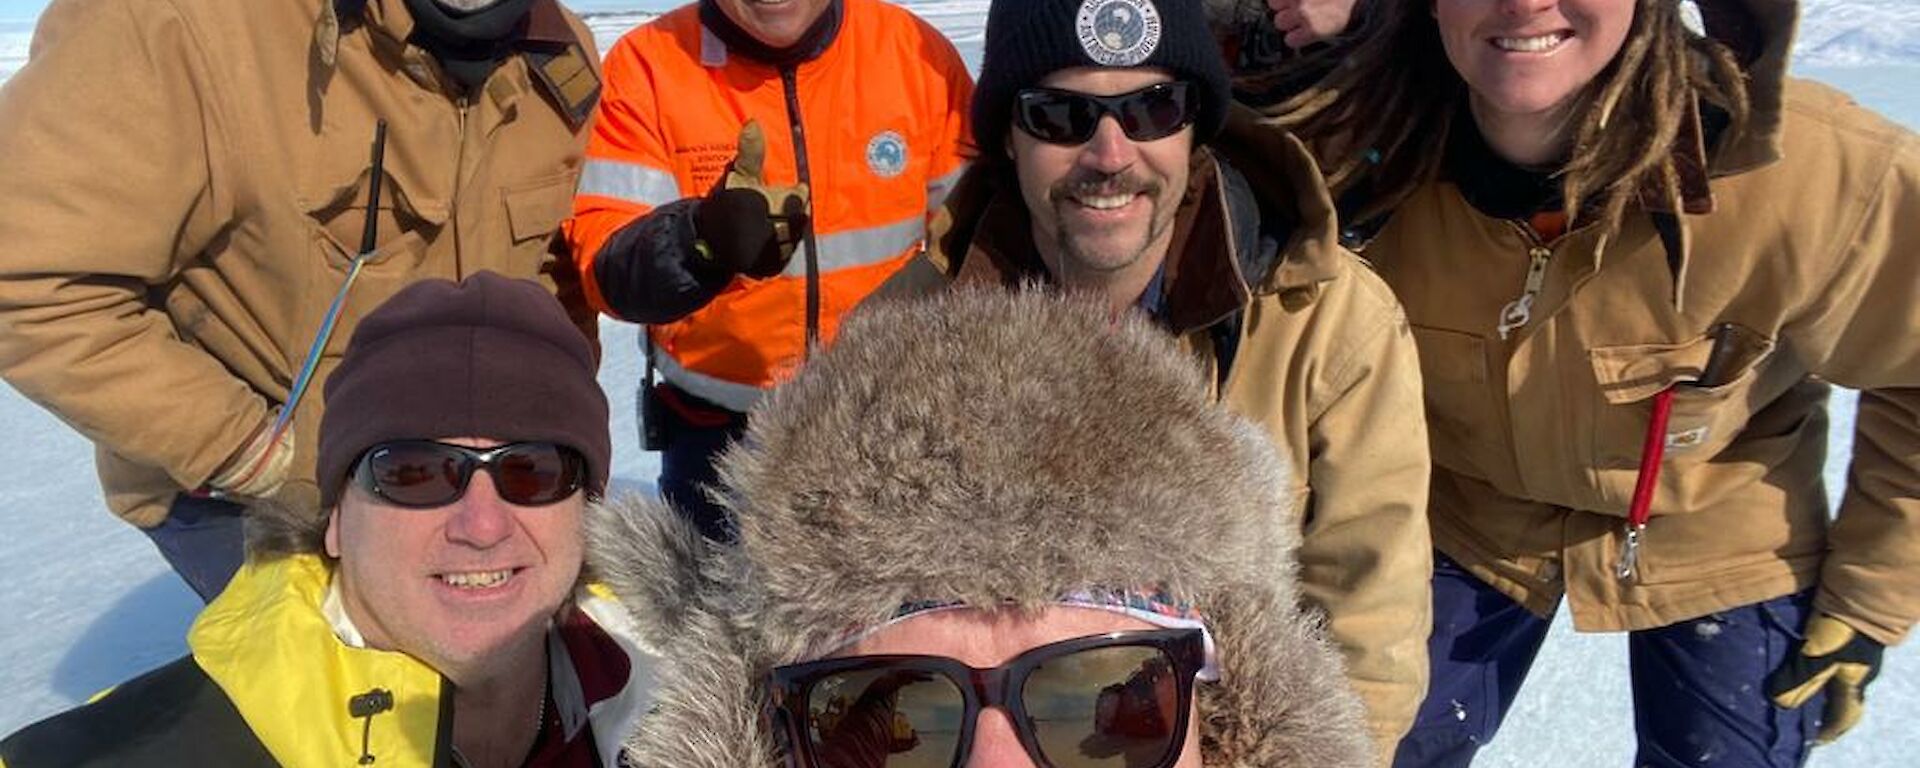 A group selfie of expeditioners on the ice, wearing fur hats, beanies, sunnies and other warm weather clothing